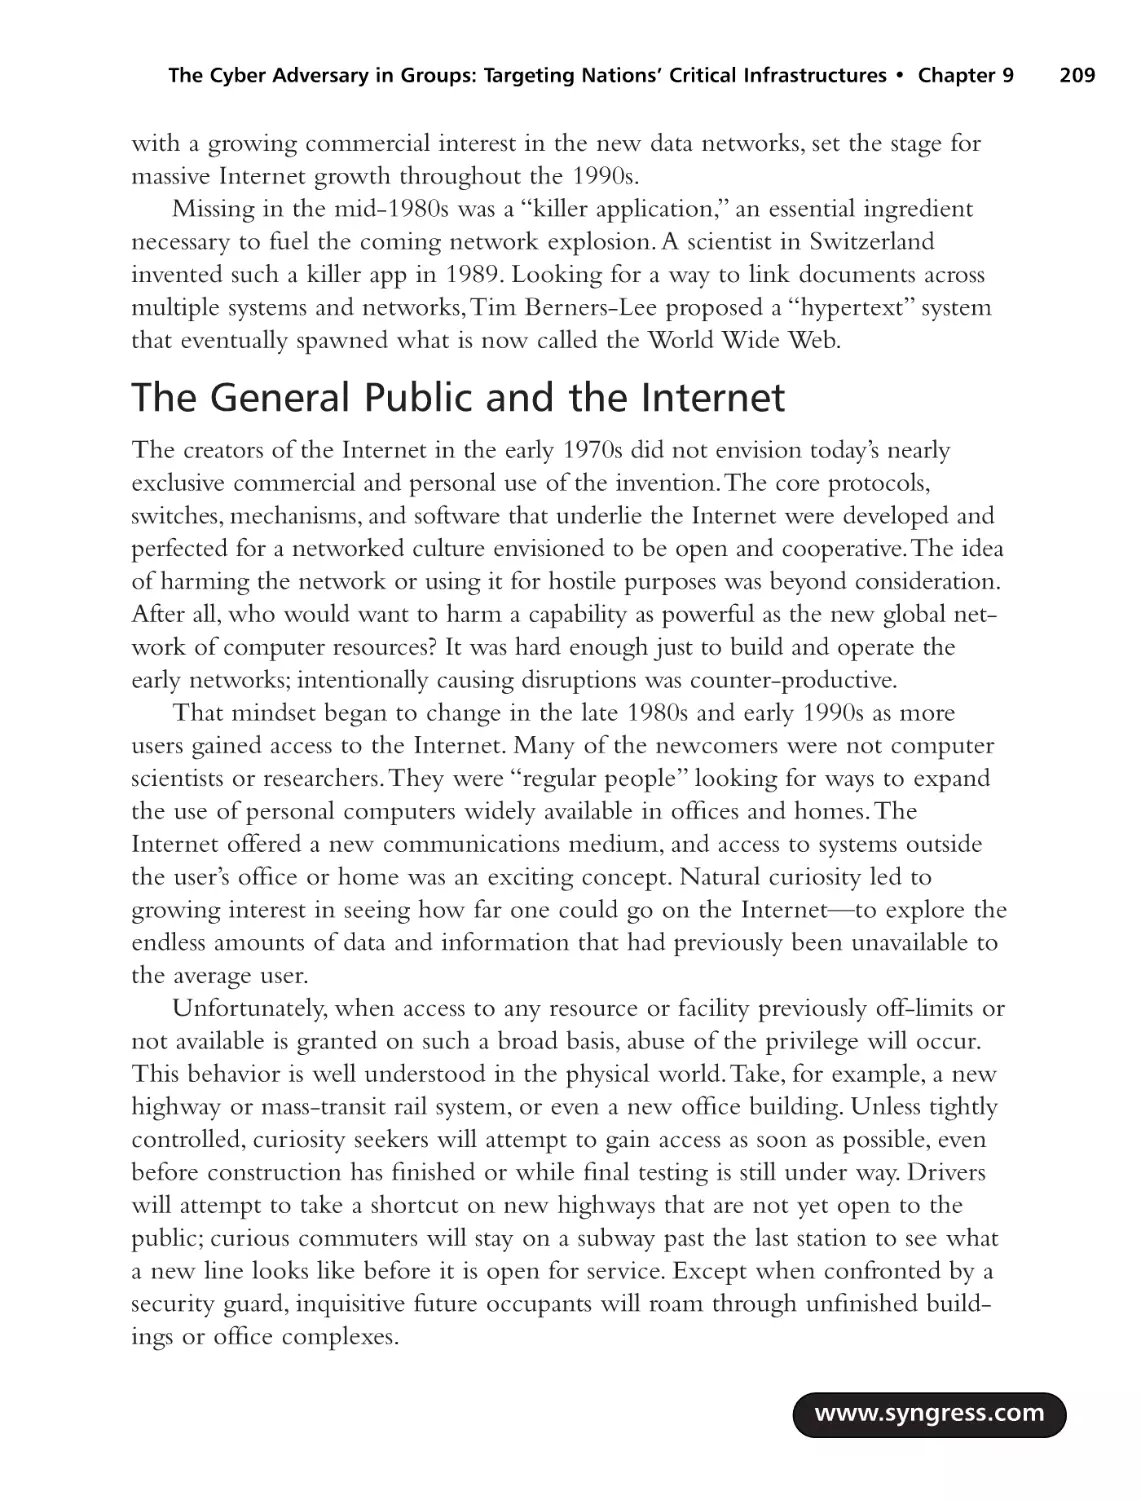 The General Public and the Internet